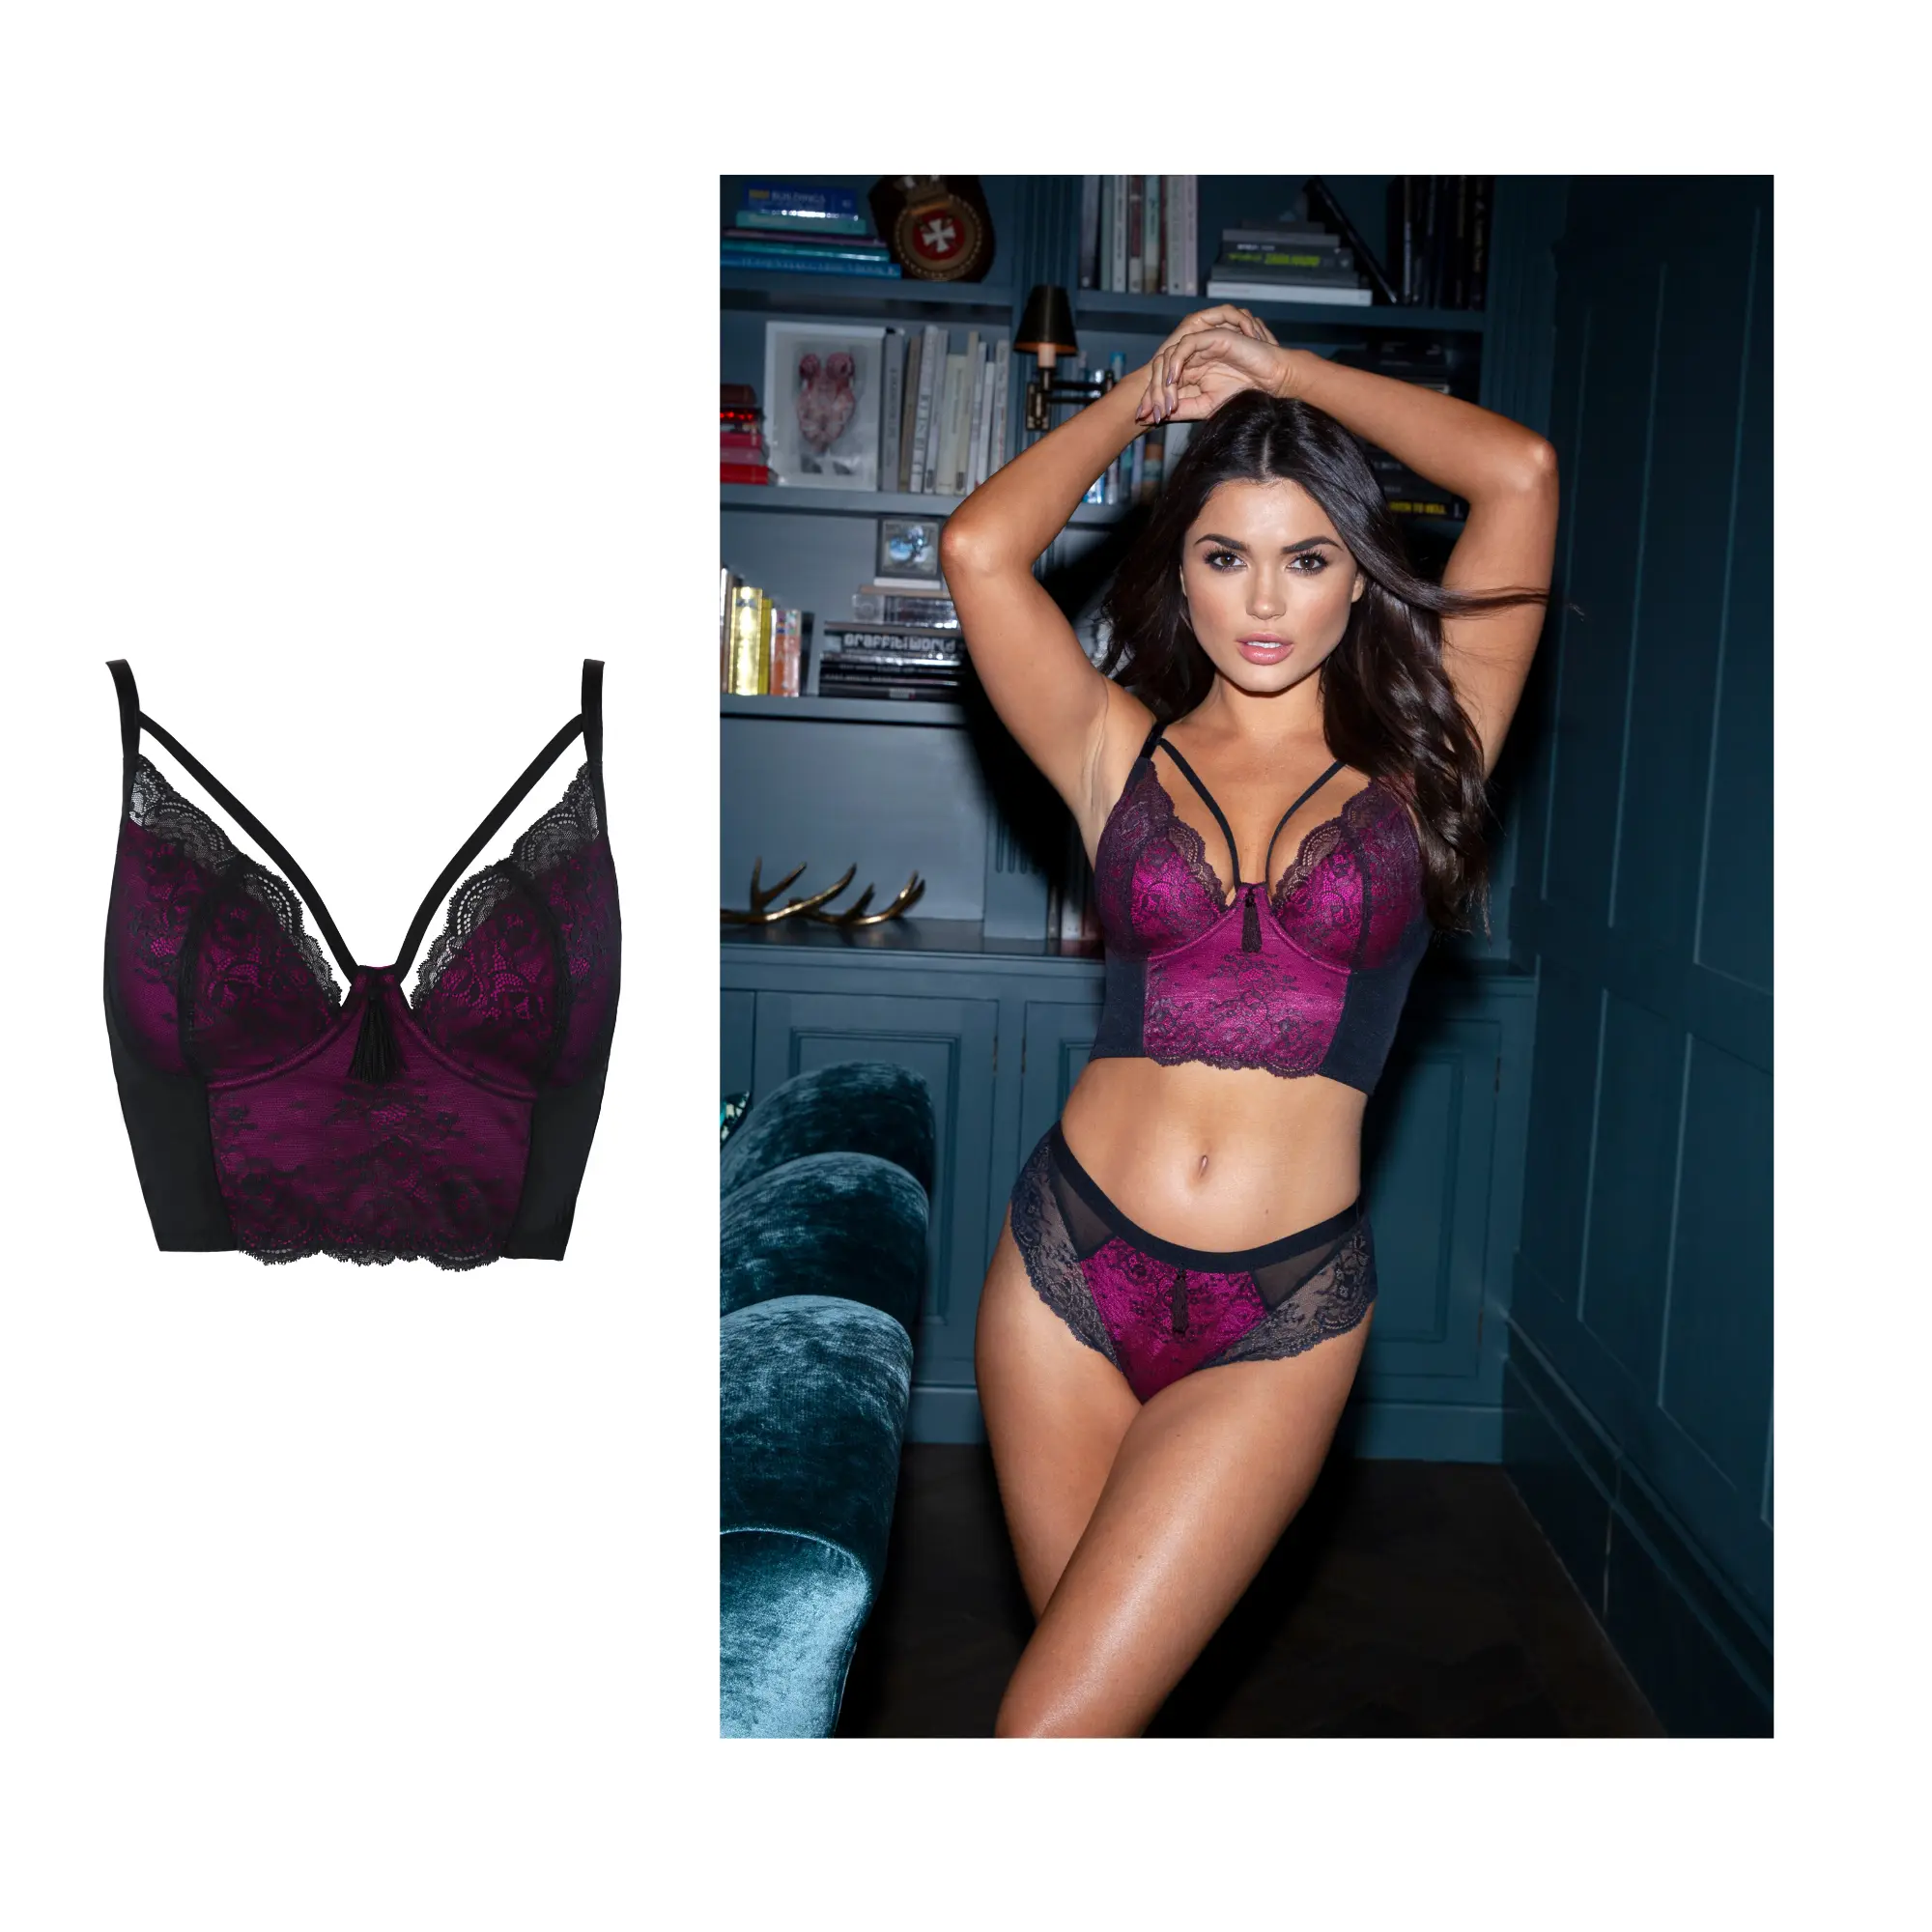 Cherry Blossom Intimates on X: The perfect bra will help you feel great  and look amazing! We're here to help every woman find the perfect fit. We  carry beautiful bras for all